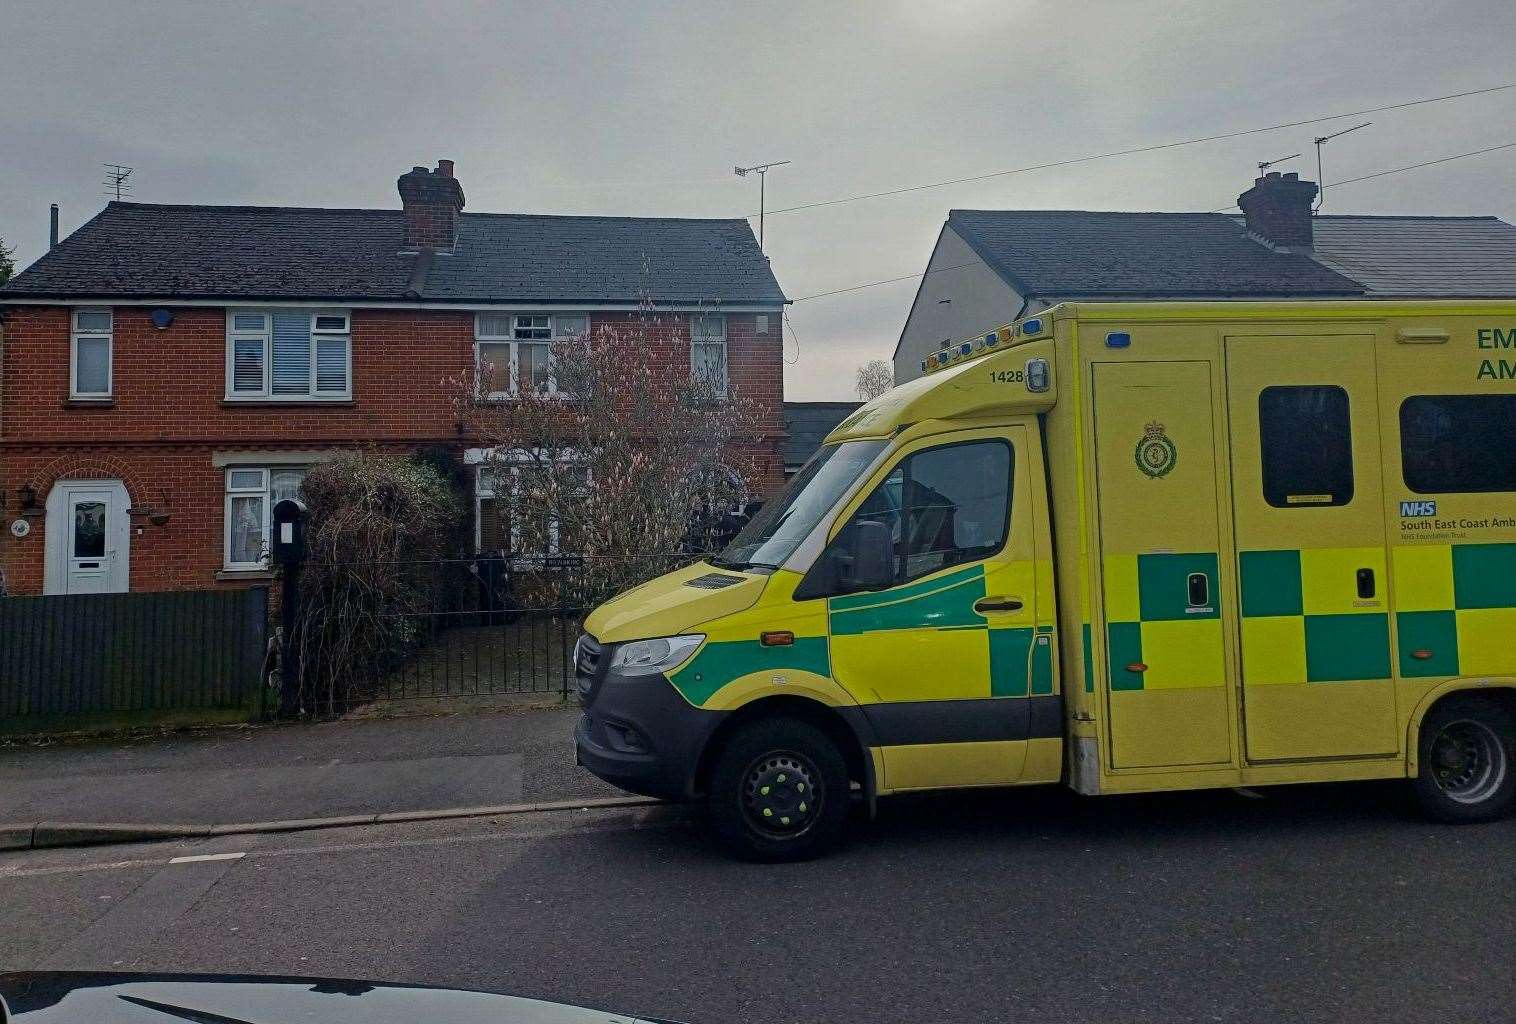 An ambulance crew was called to Sheena Williams’ home in Plains Avenue, Maidstone